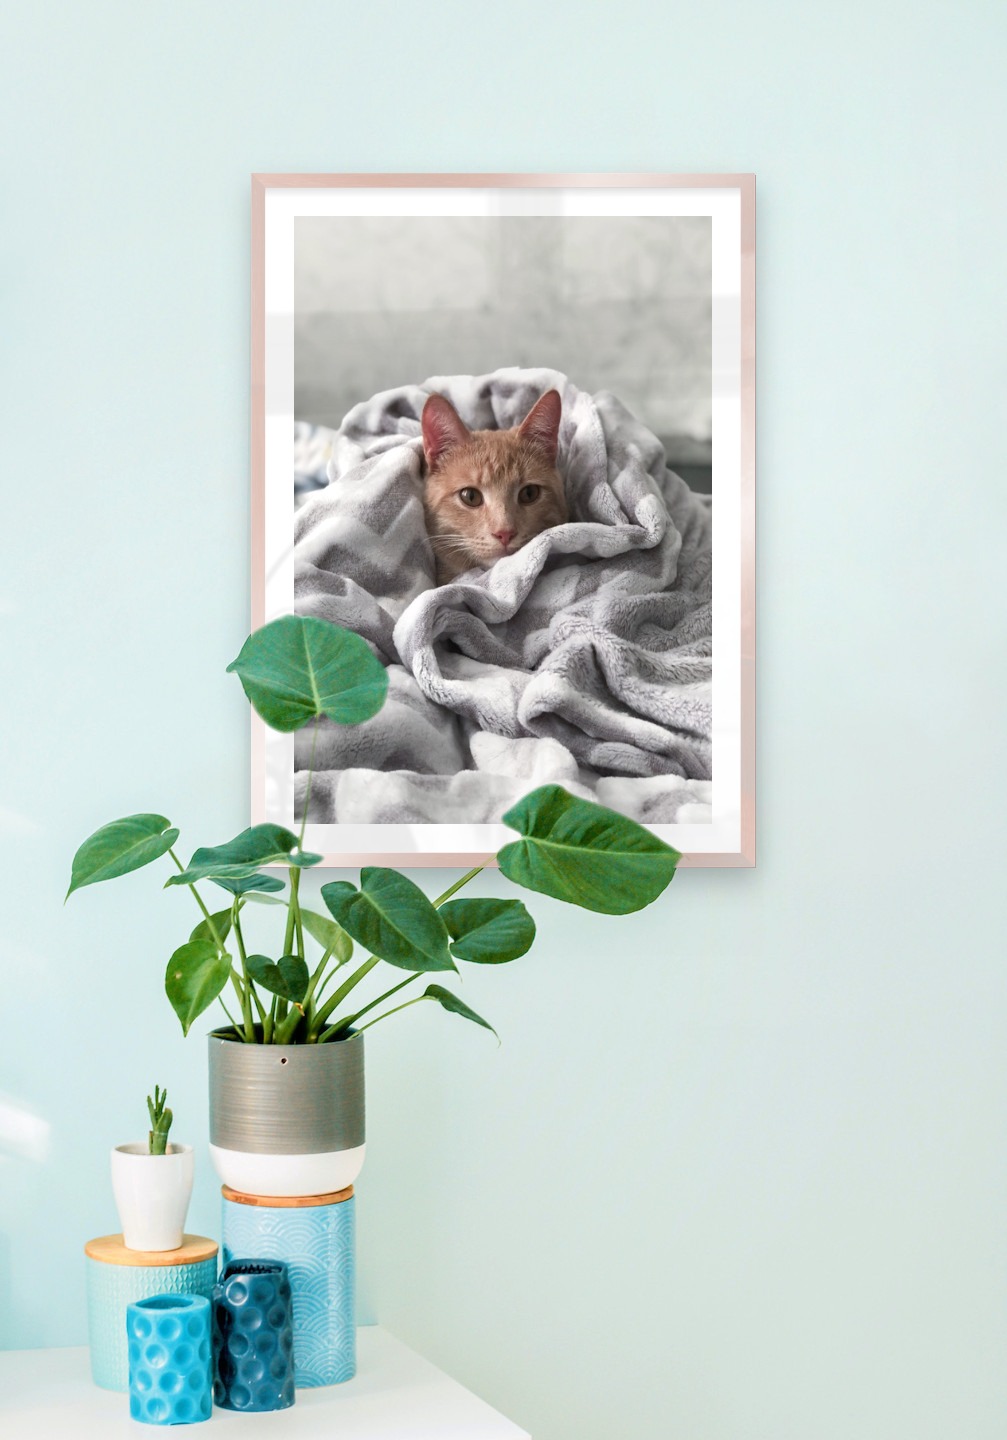 Gallery wall with picture frame in copper in size 50x70 with print "Cat in felt"